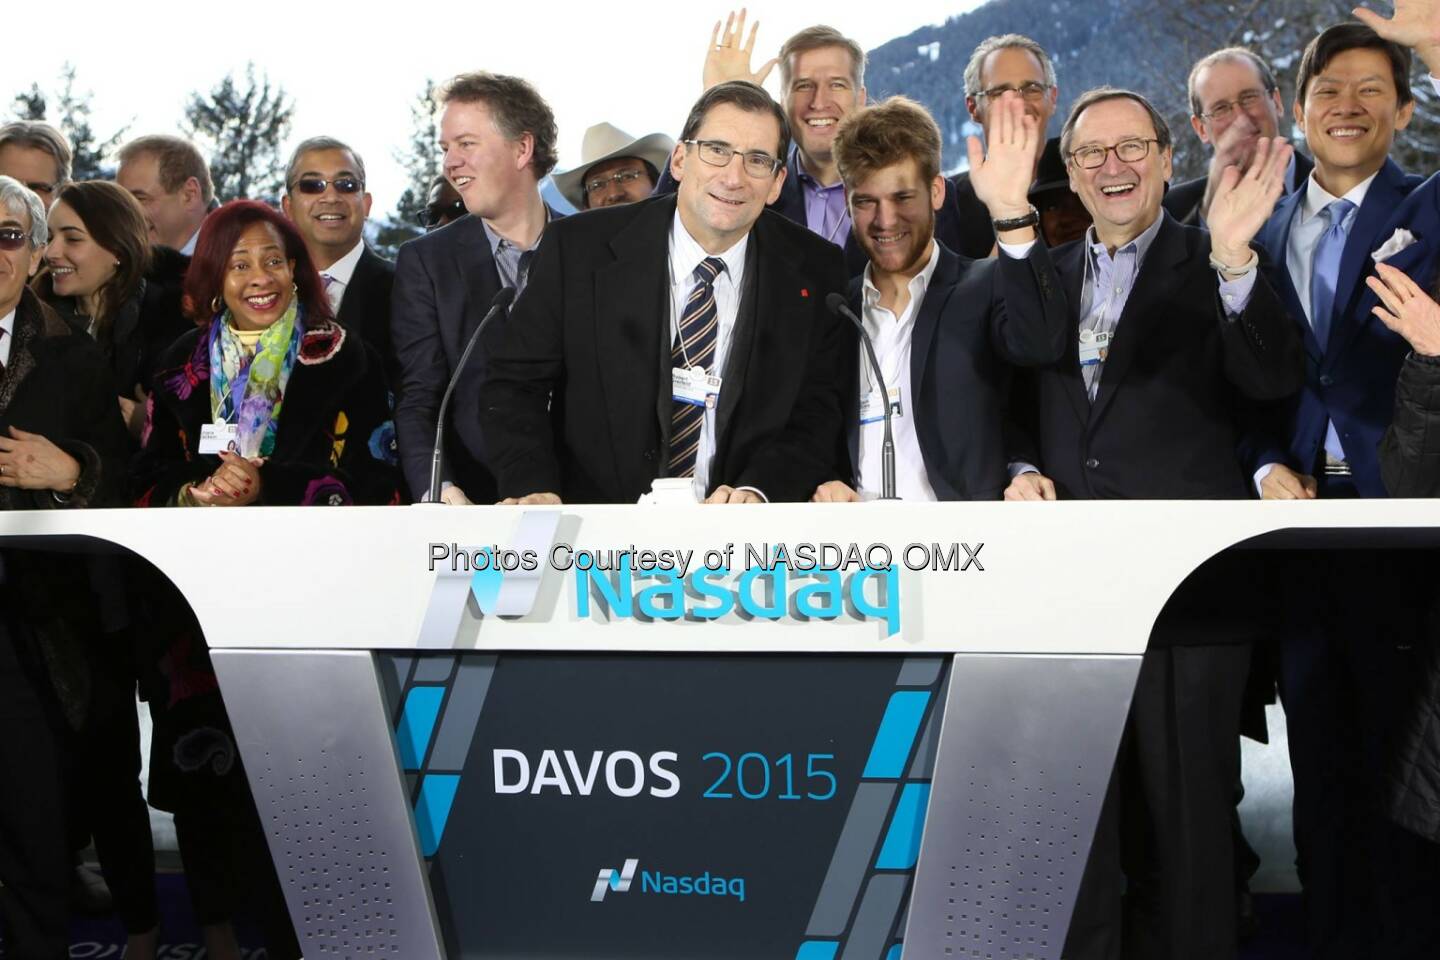 Great photo from the 10th Annual Nasdaq Opening Bell from the World Economic Forum in Davos! #WEF15  Source: http://facebook.com/NASDAQ